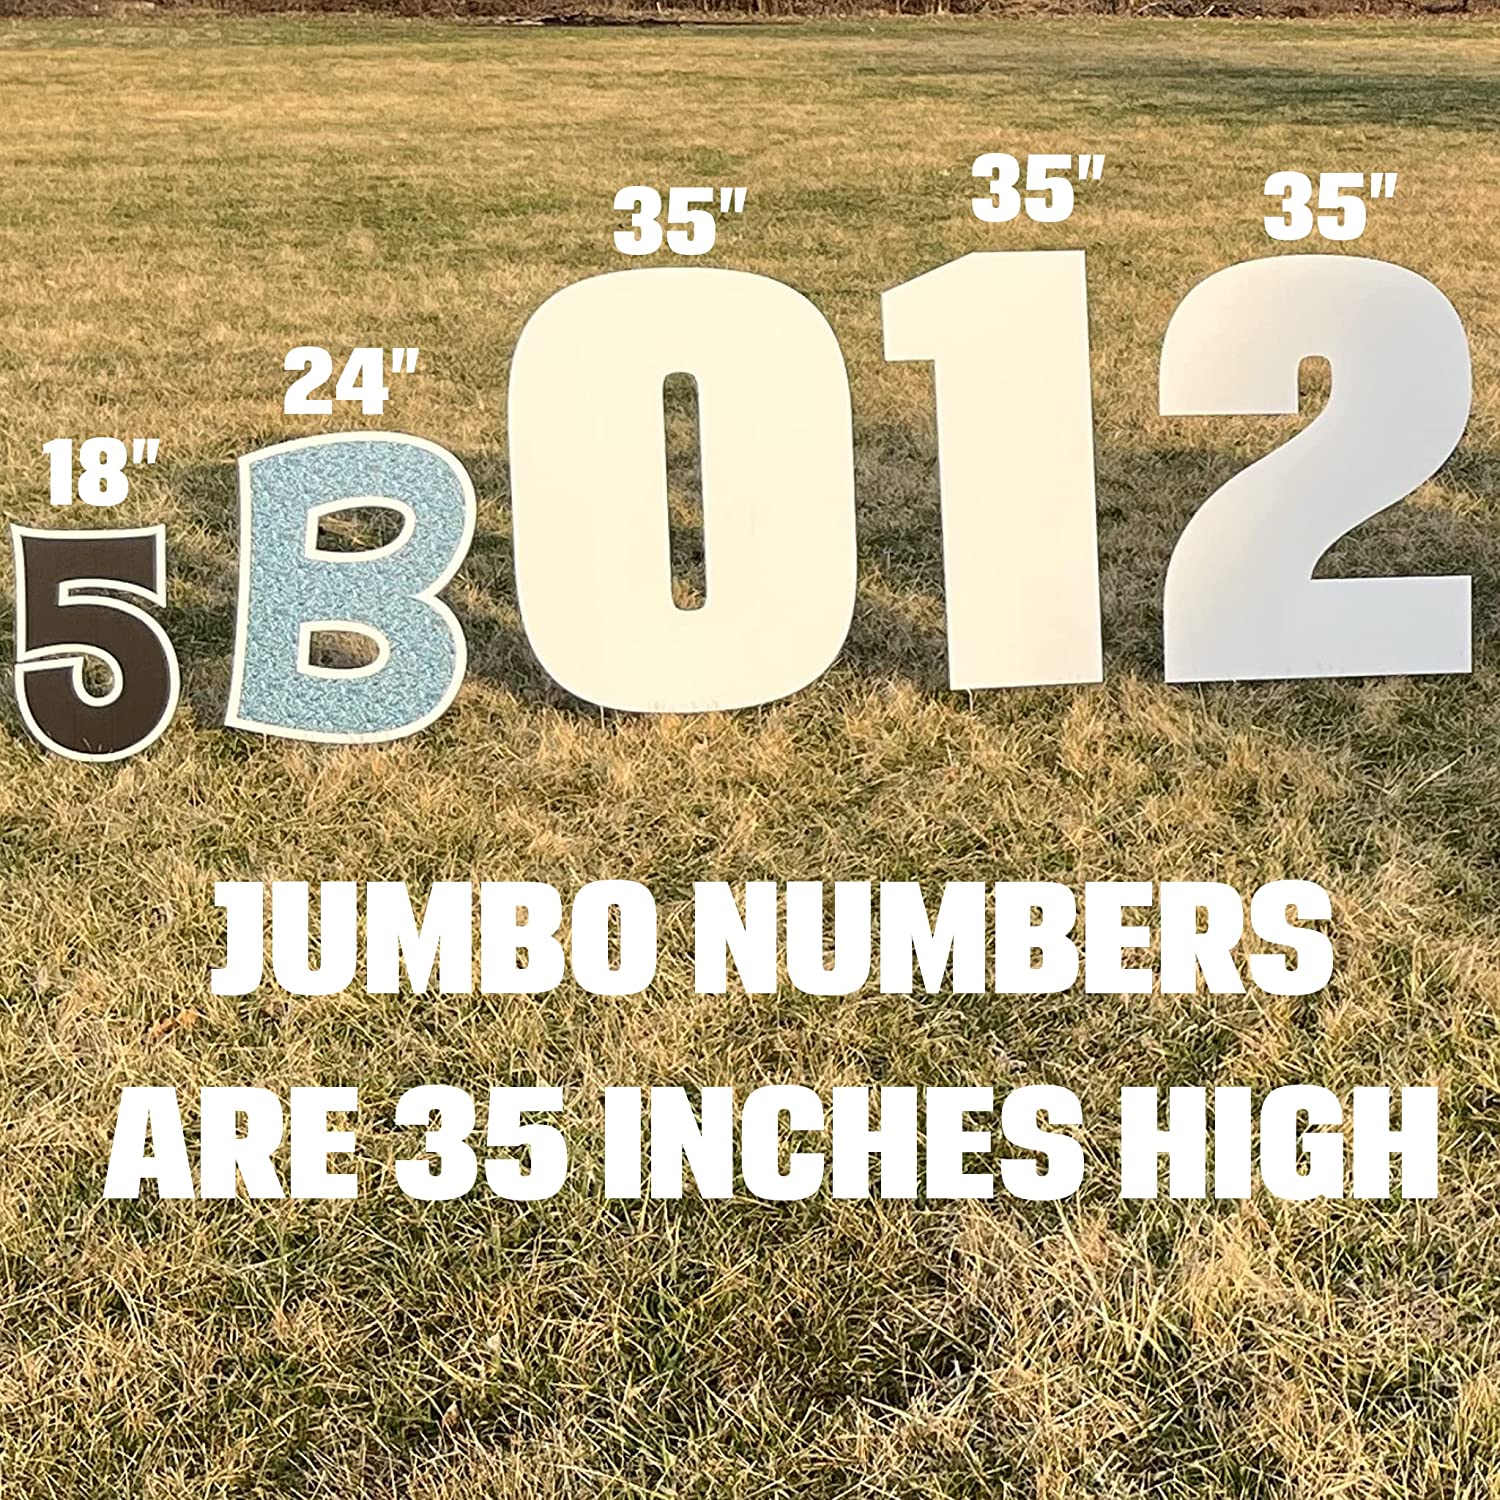 Jumbo 35" Breuer Solid Color Yard Sign Numbers